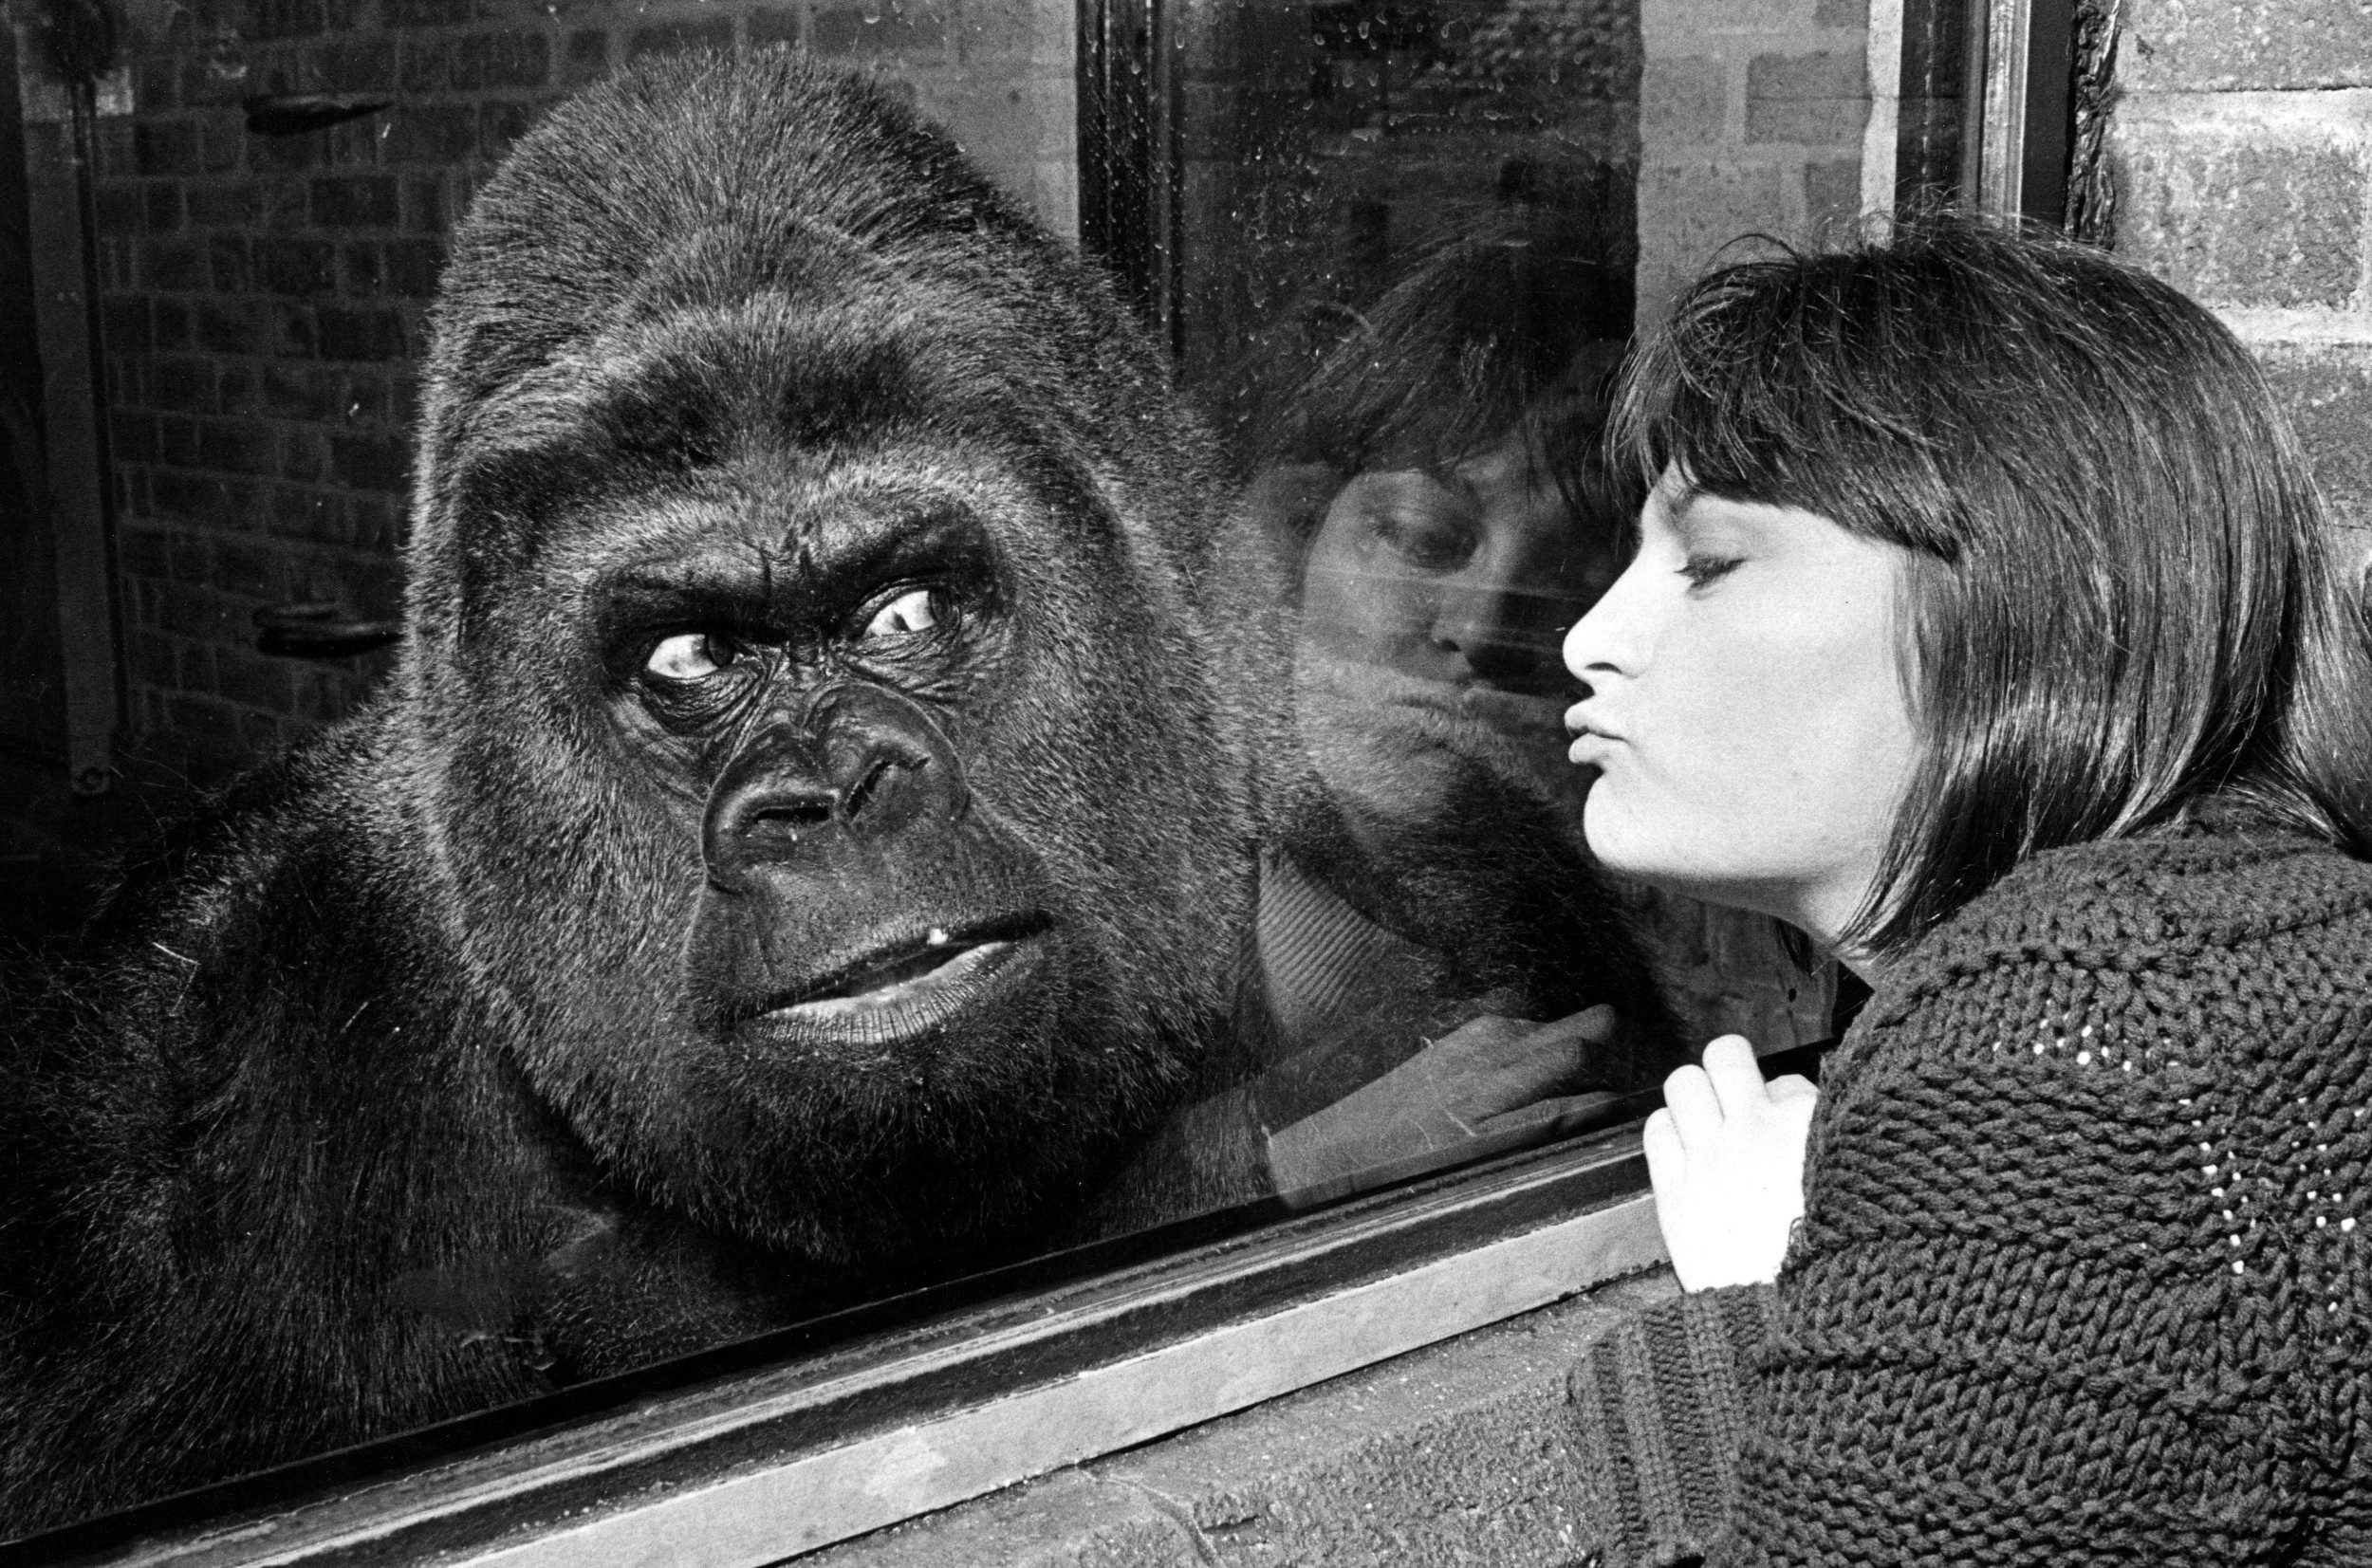 With Guy the Gorilla at London Zoo in 1977 - John Curtis/Shutterstock